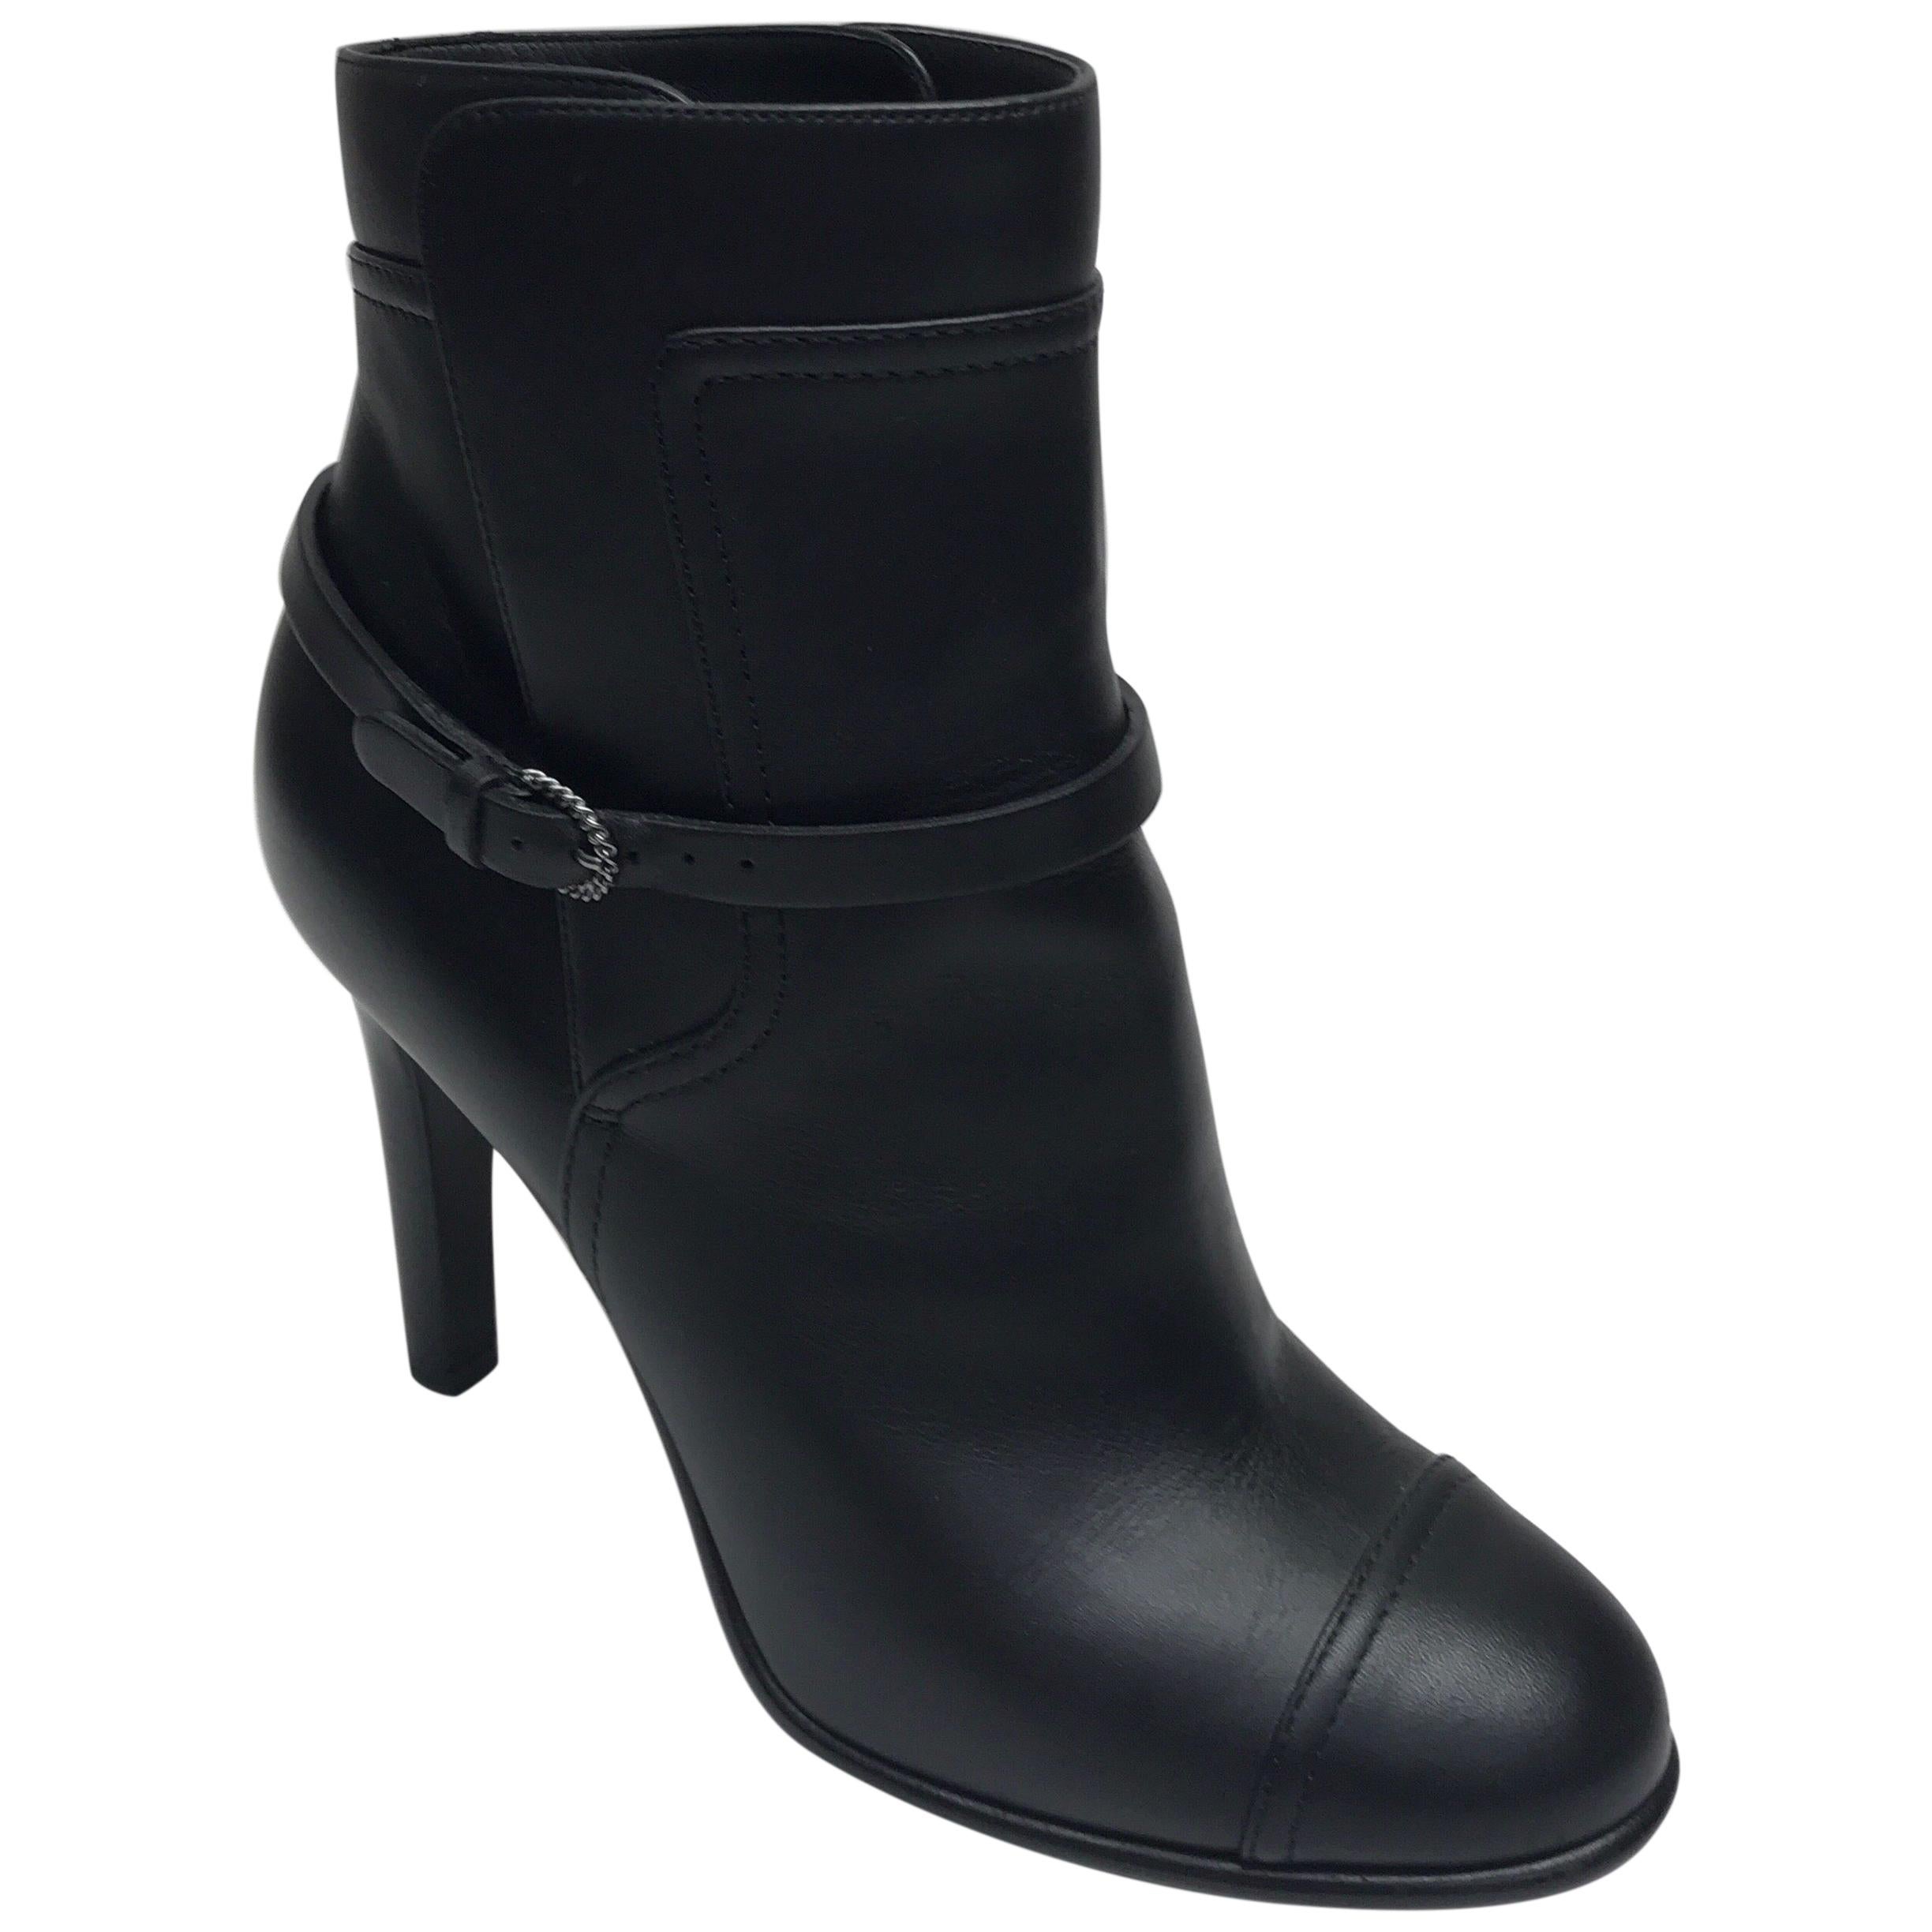 CHANEL Black Leather High Heel Ankle Boots -38